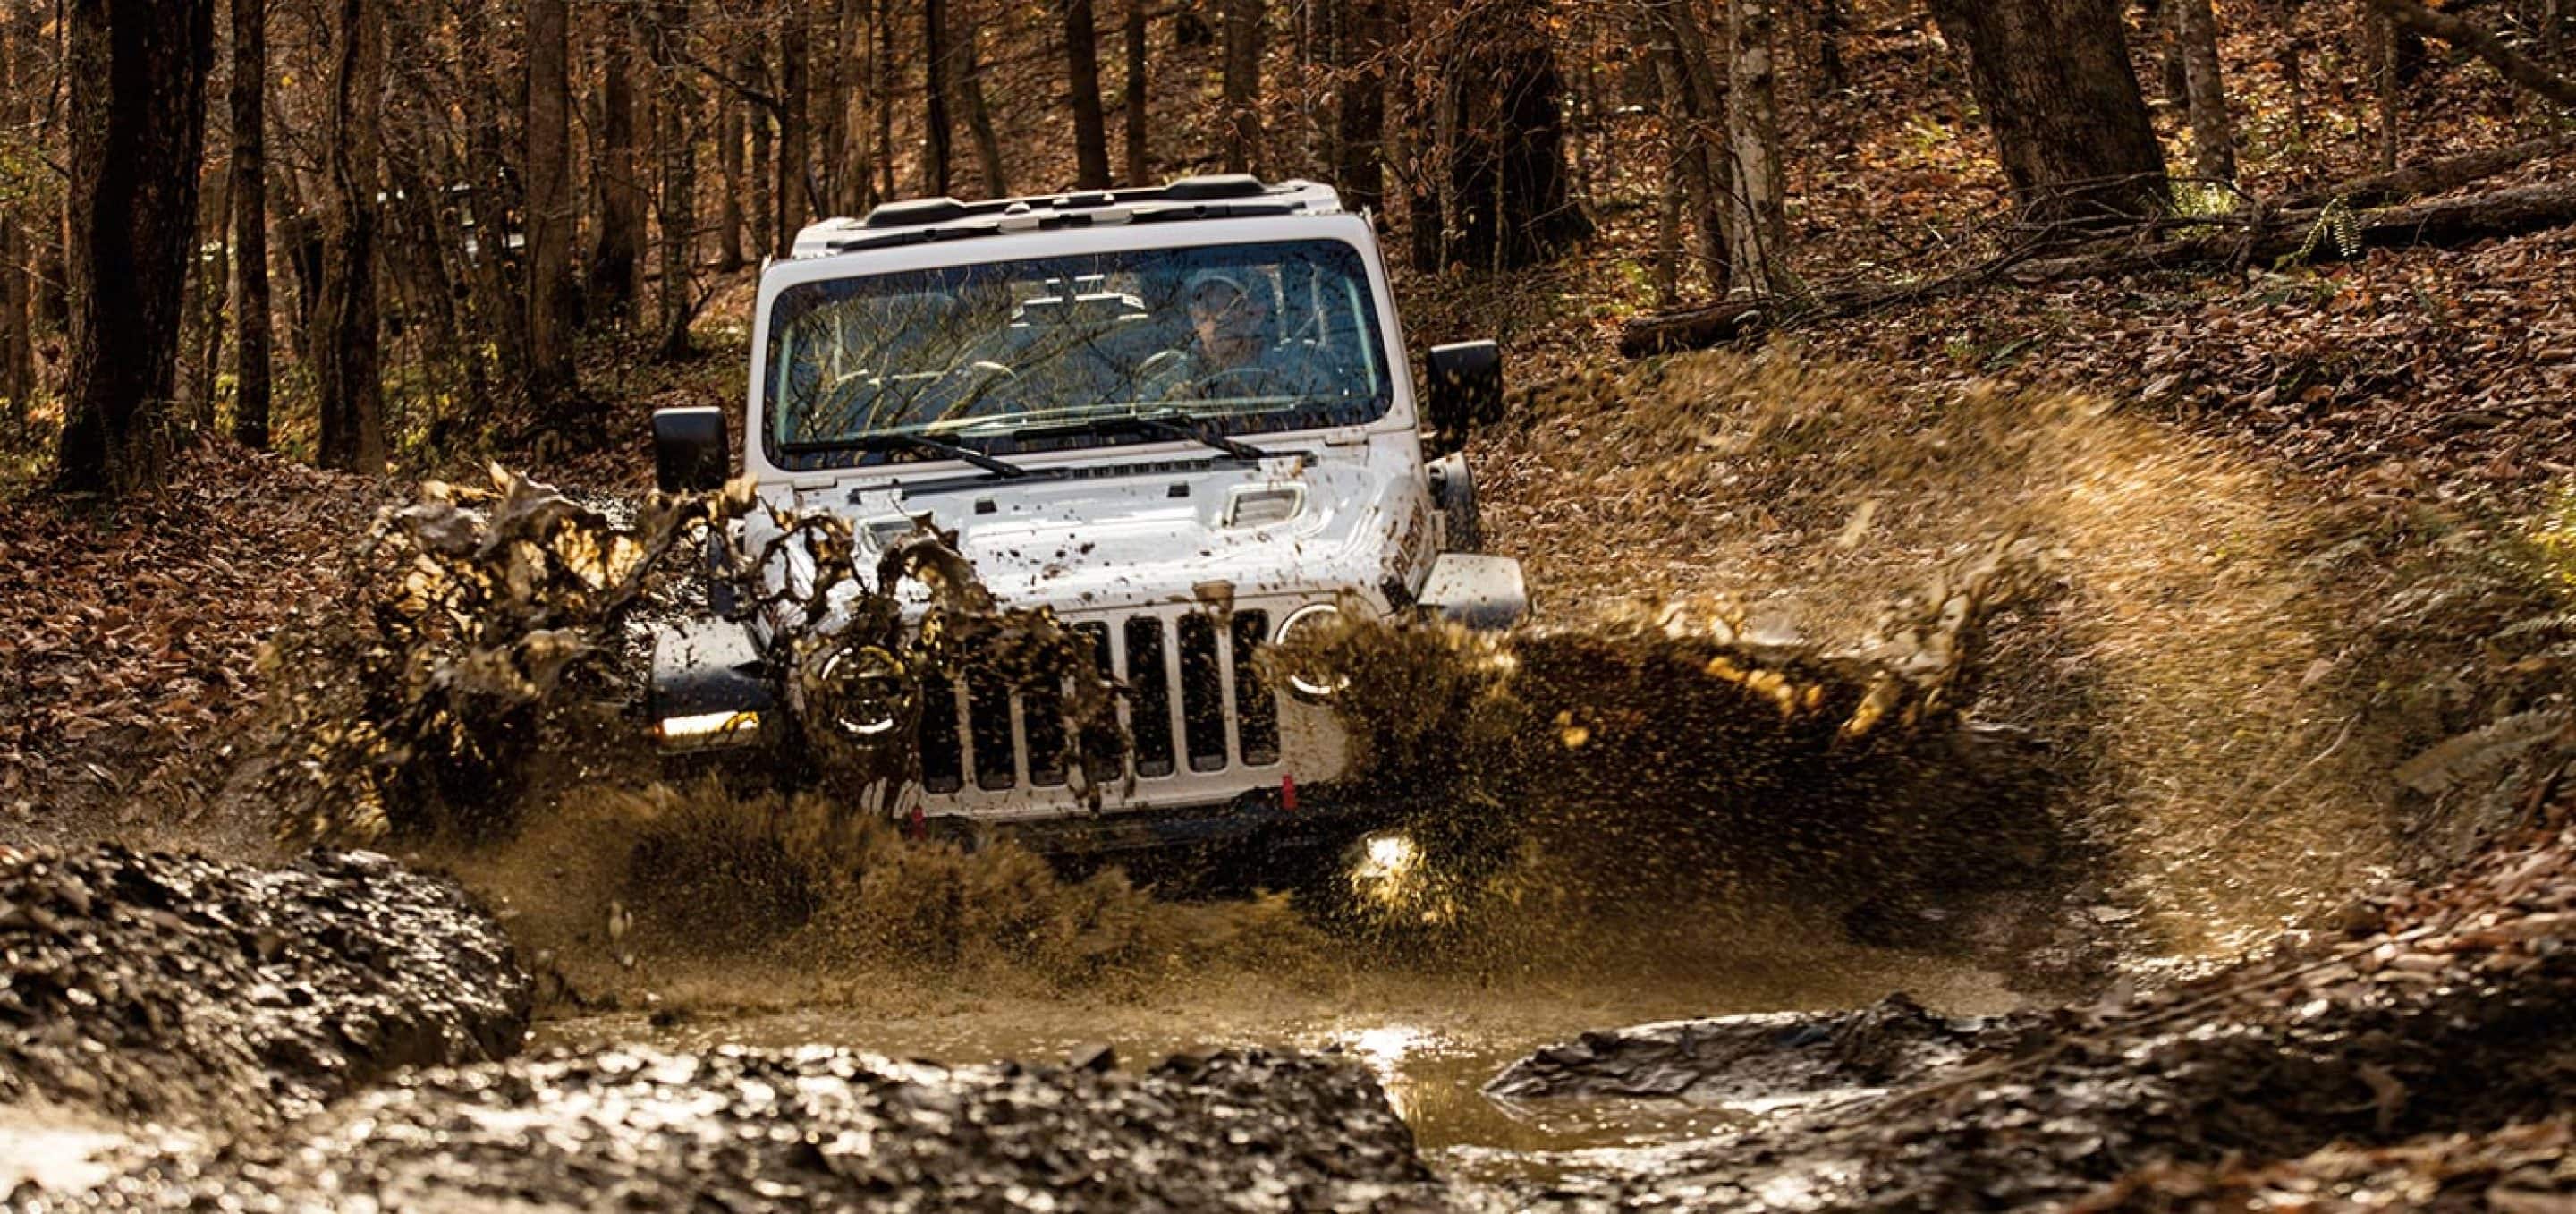 The Wrangler's Tech, Luxury, and Off-Road Features